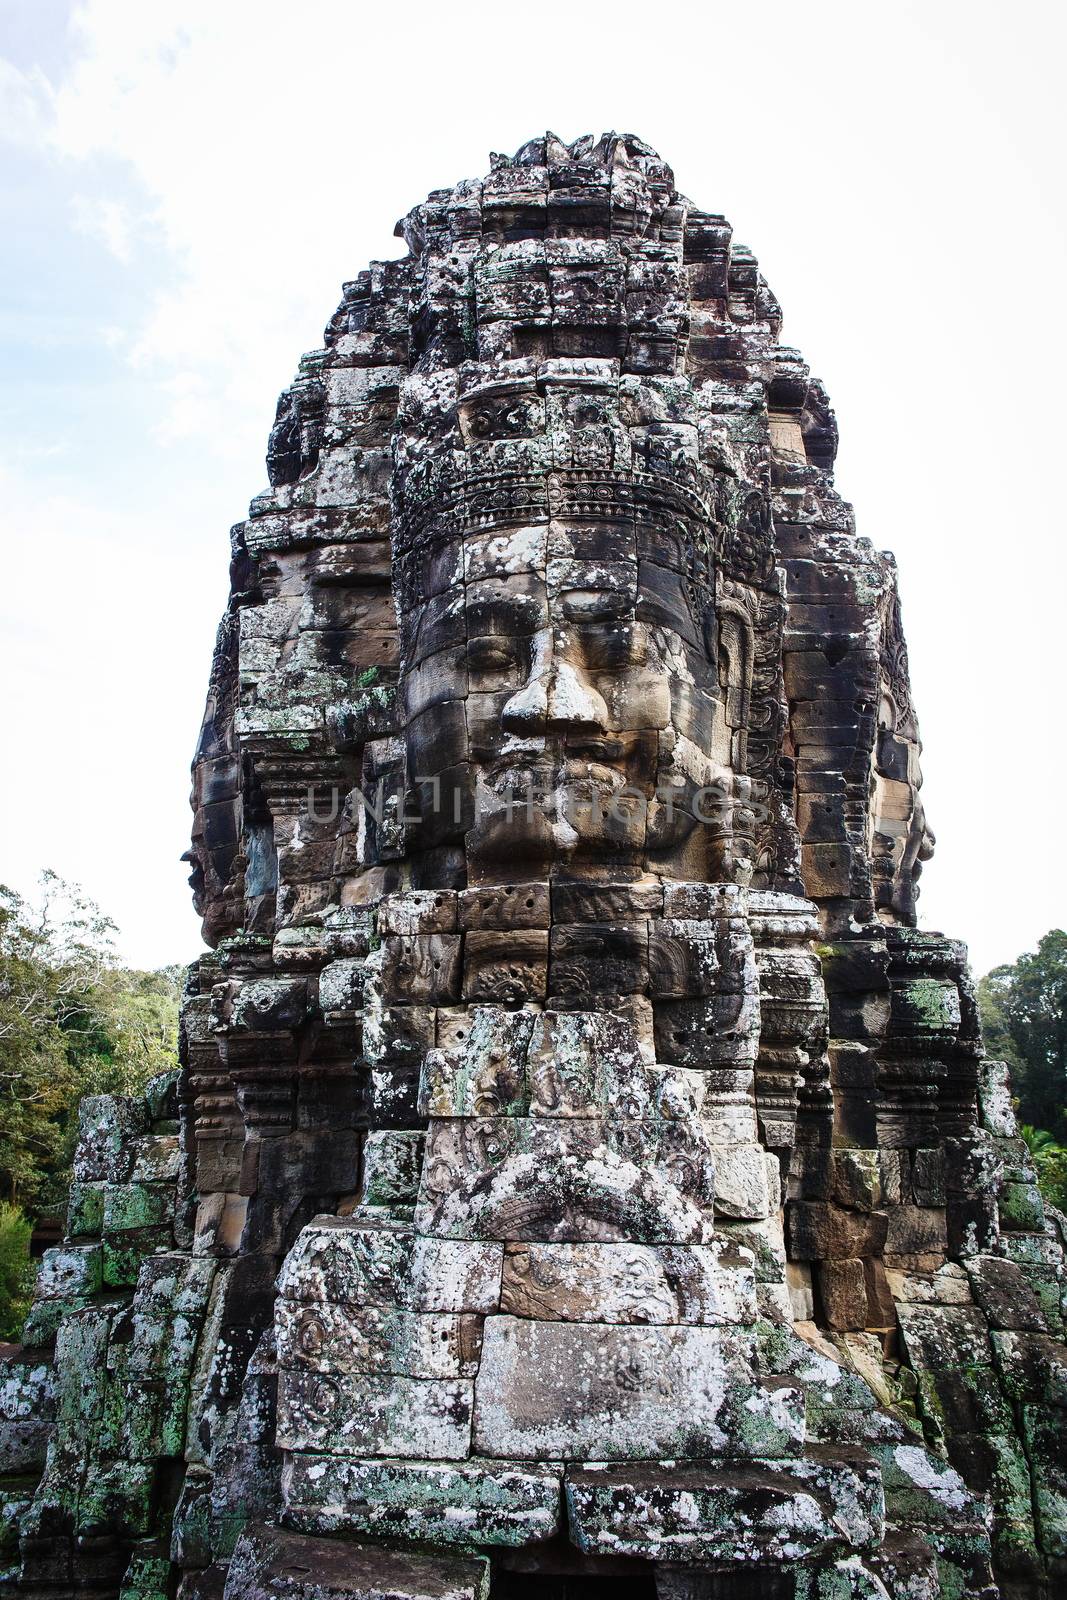 Face Towers in the ancient city of Cambodia